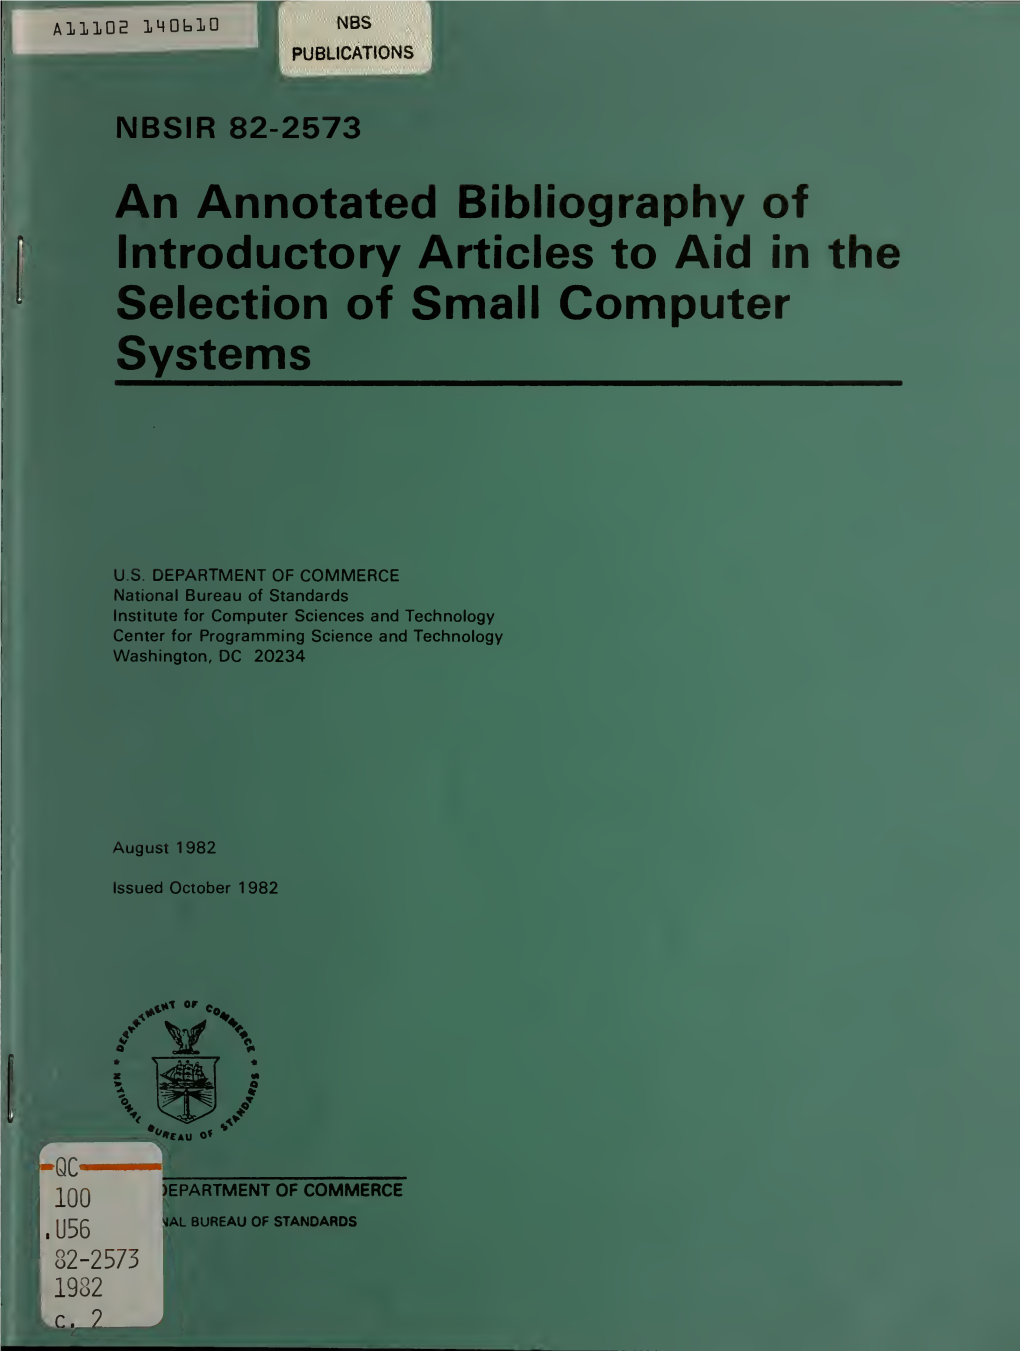 An Annotated Bibliography of Introductory Articles to Aid in the Selection of Small Computer Systems